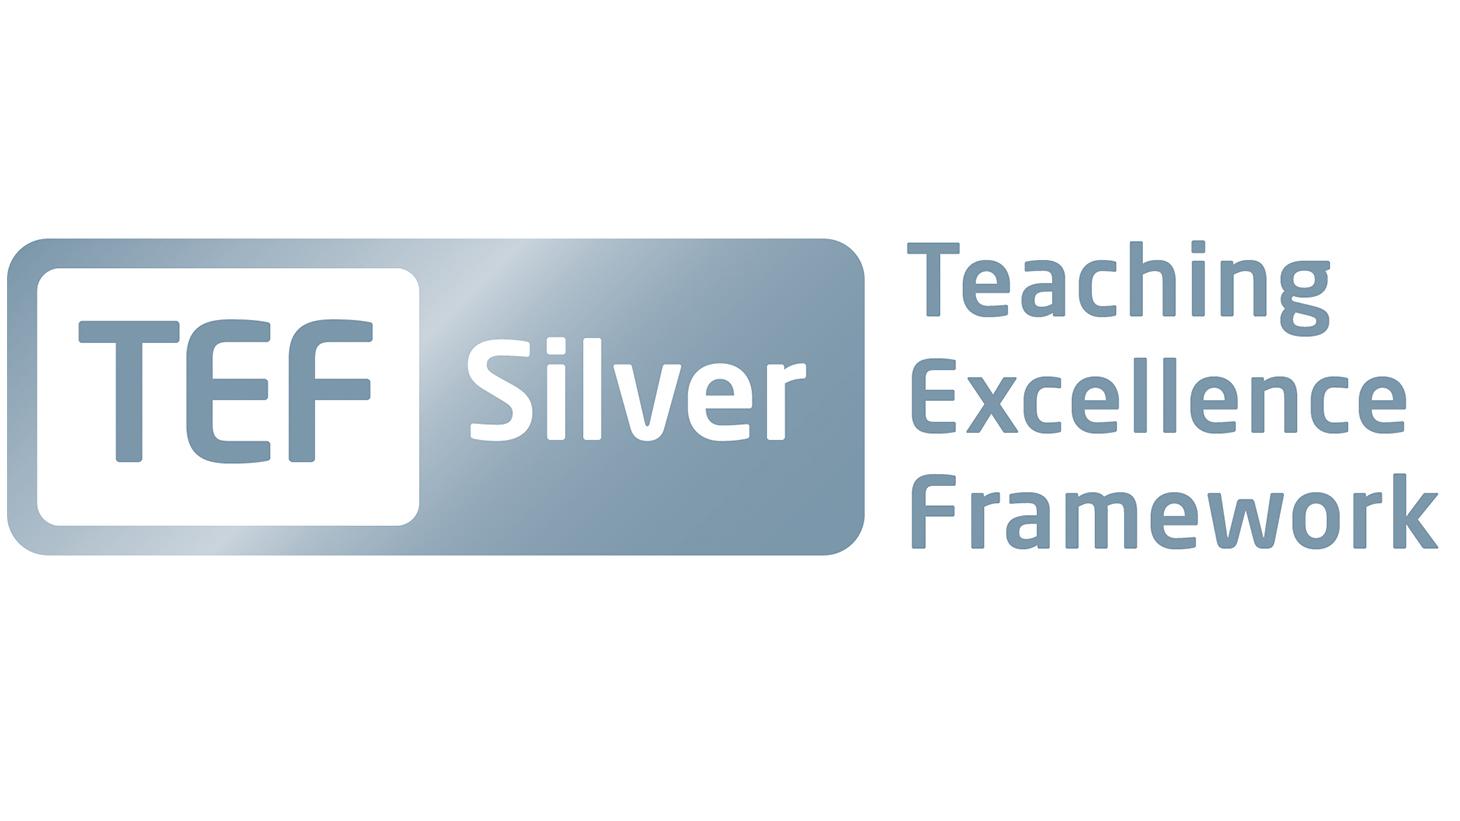 Moorlands College receives a Silver Teaching Excellence Framework (TEF) award